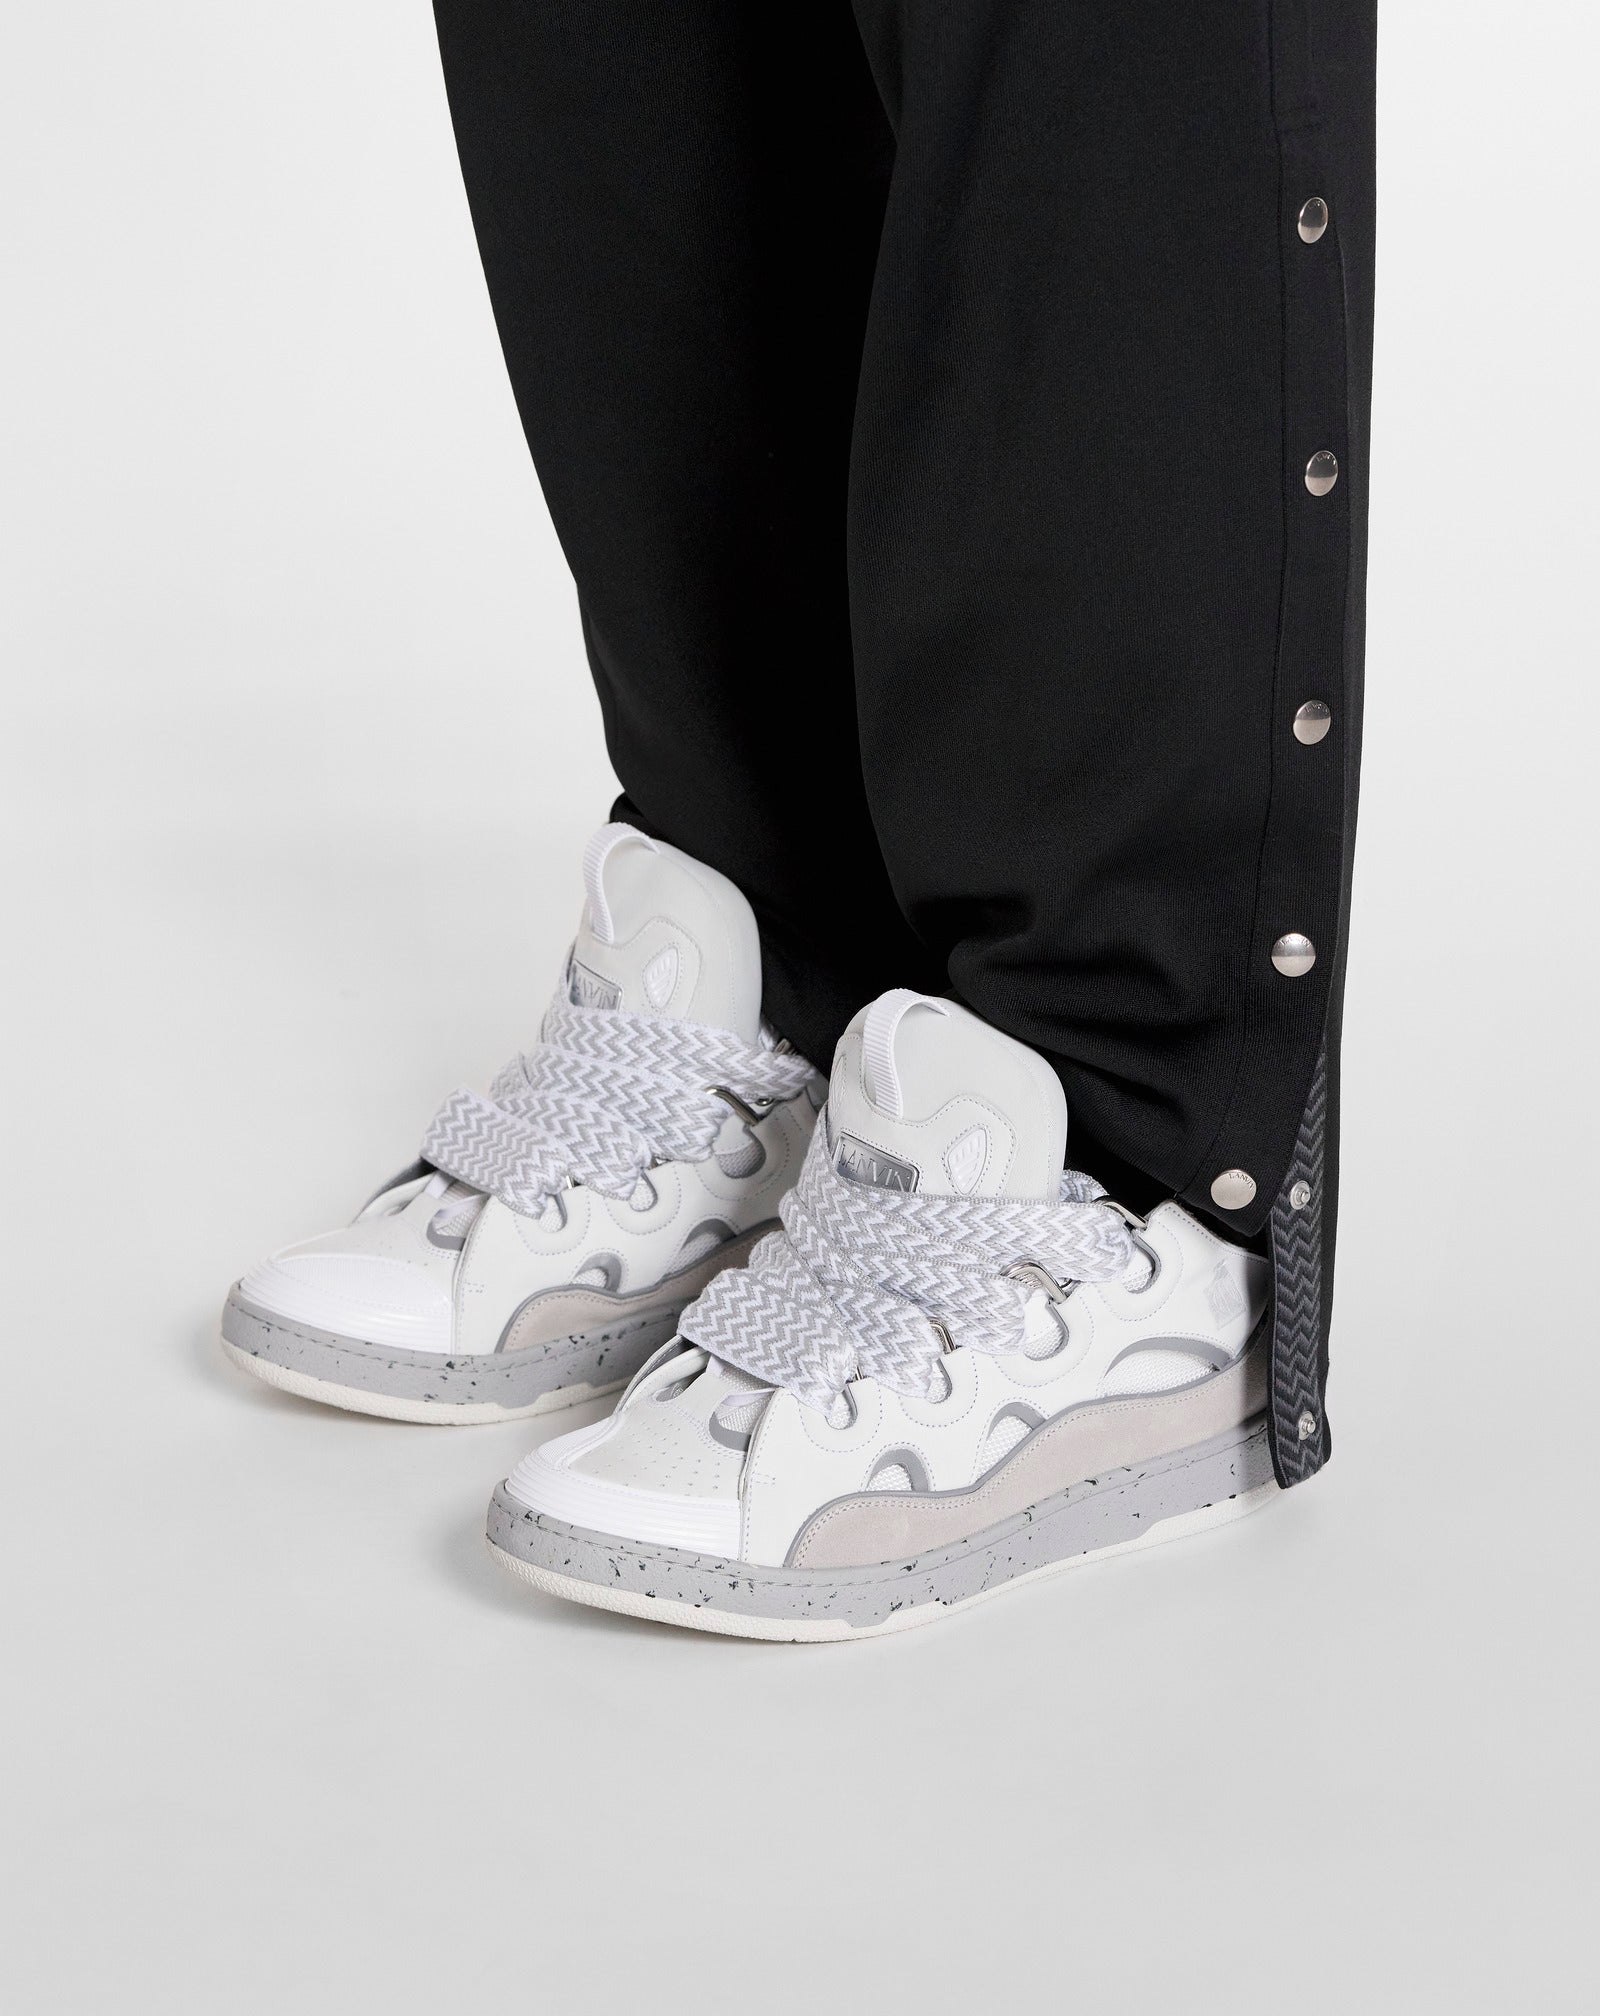 LEATHER CURB SNEAKERS GREY/WHITE | Lanvin – LANVIN